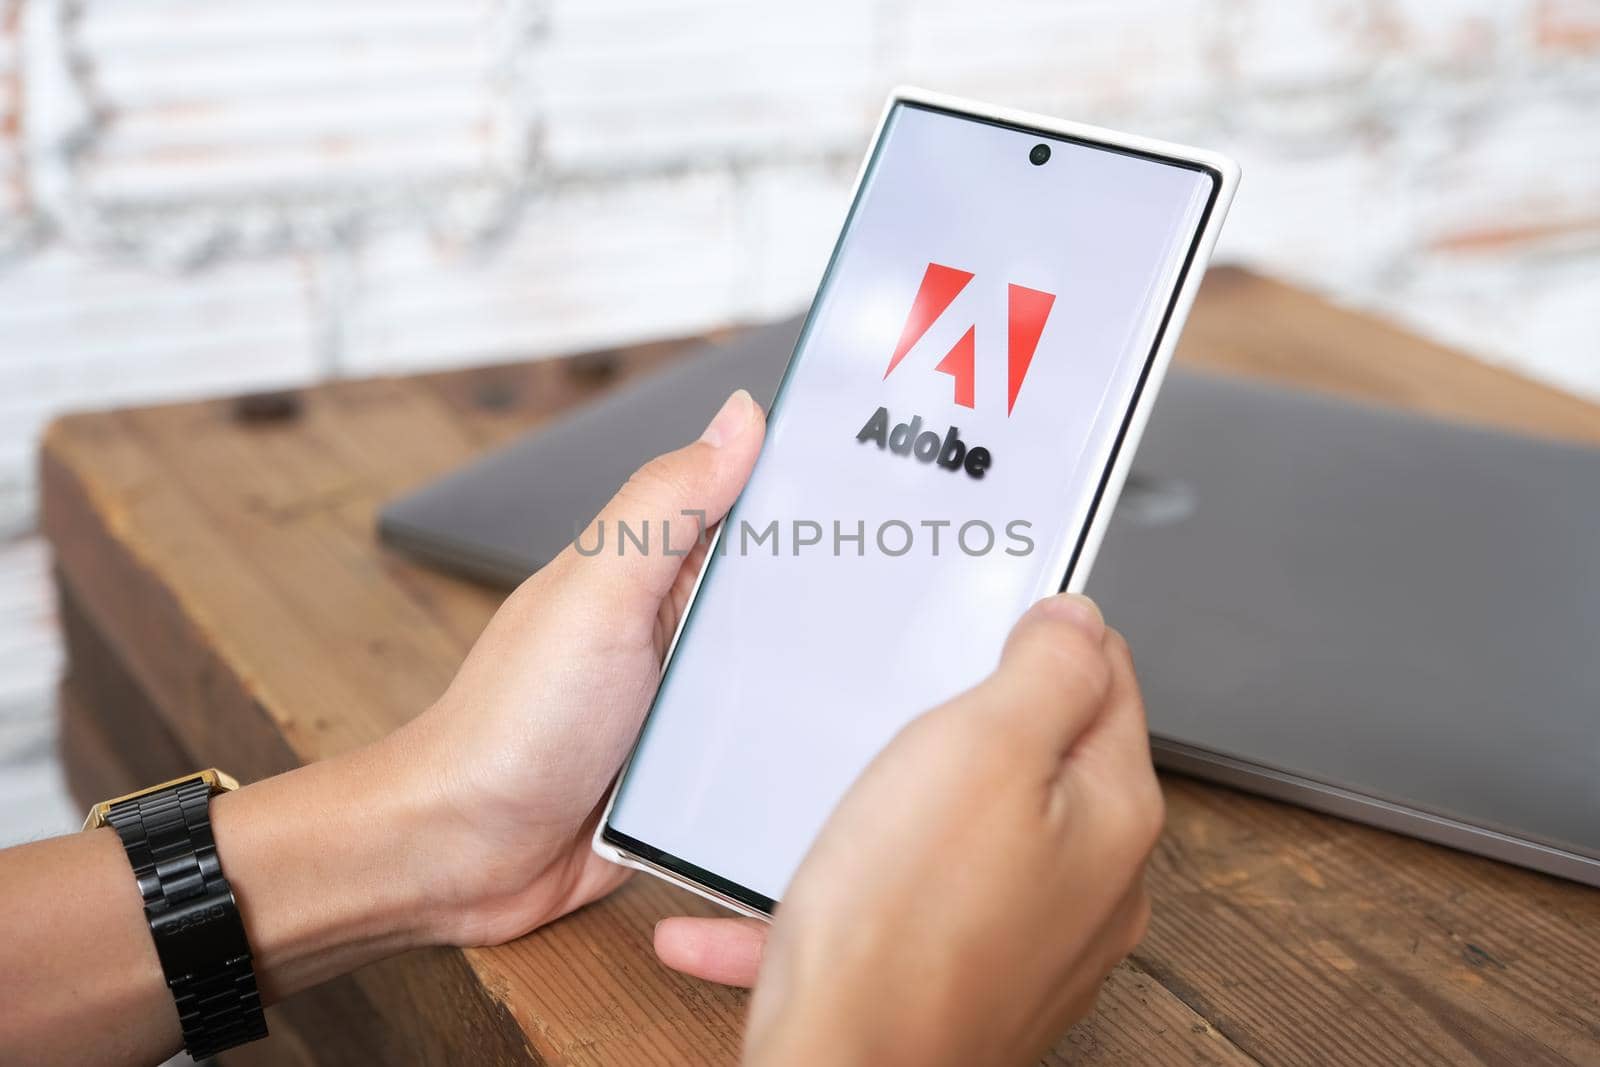 Chiangmai, Thailand, June 06, 2021: woman holding smartphone mobile show Adobe logo on the smartphone screen.